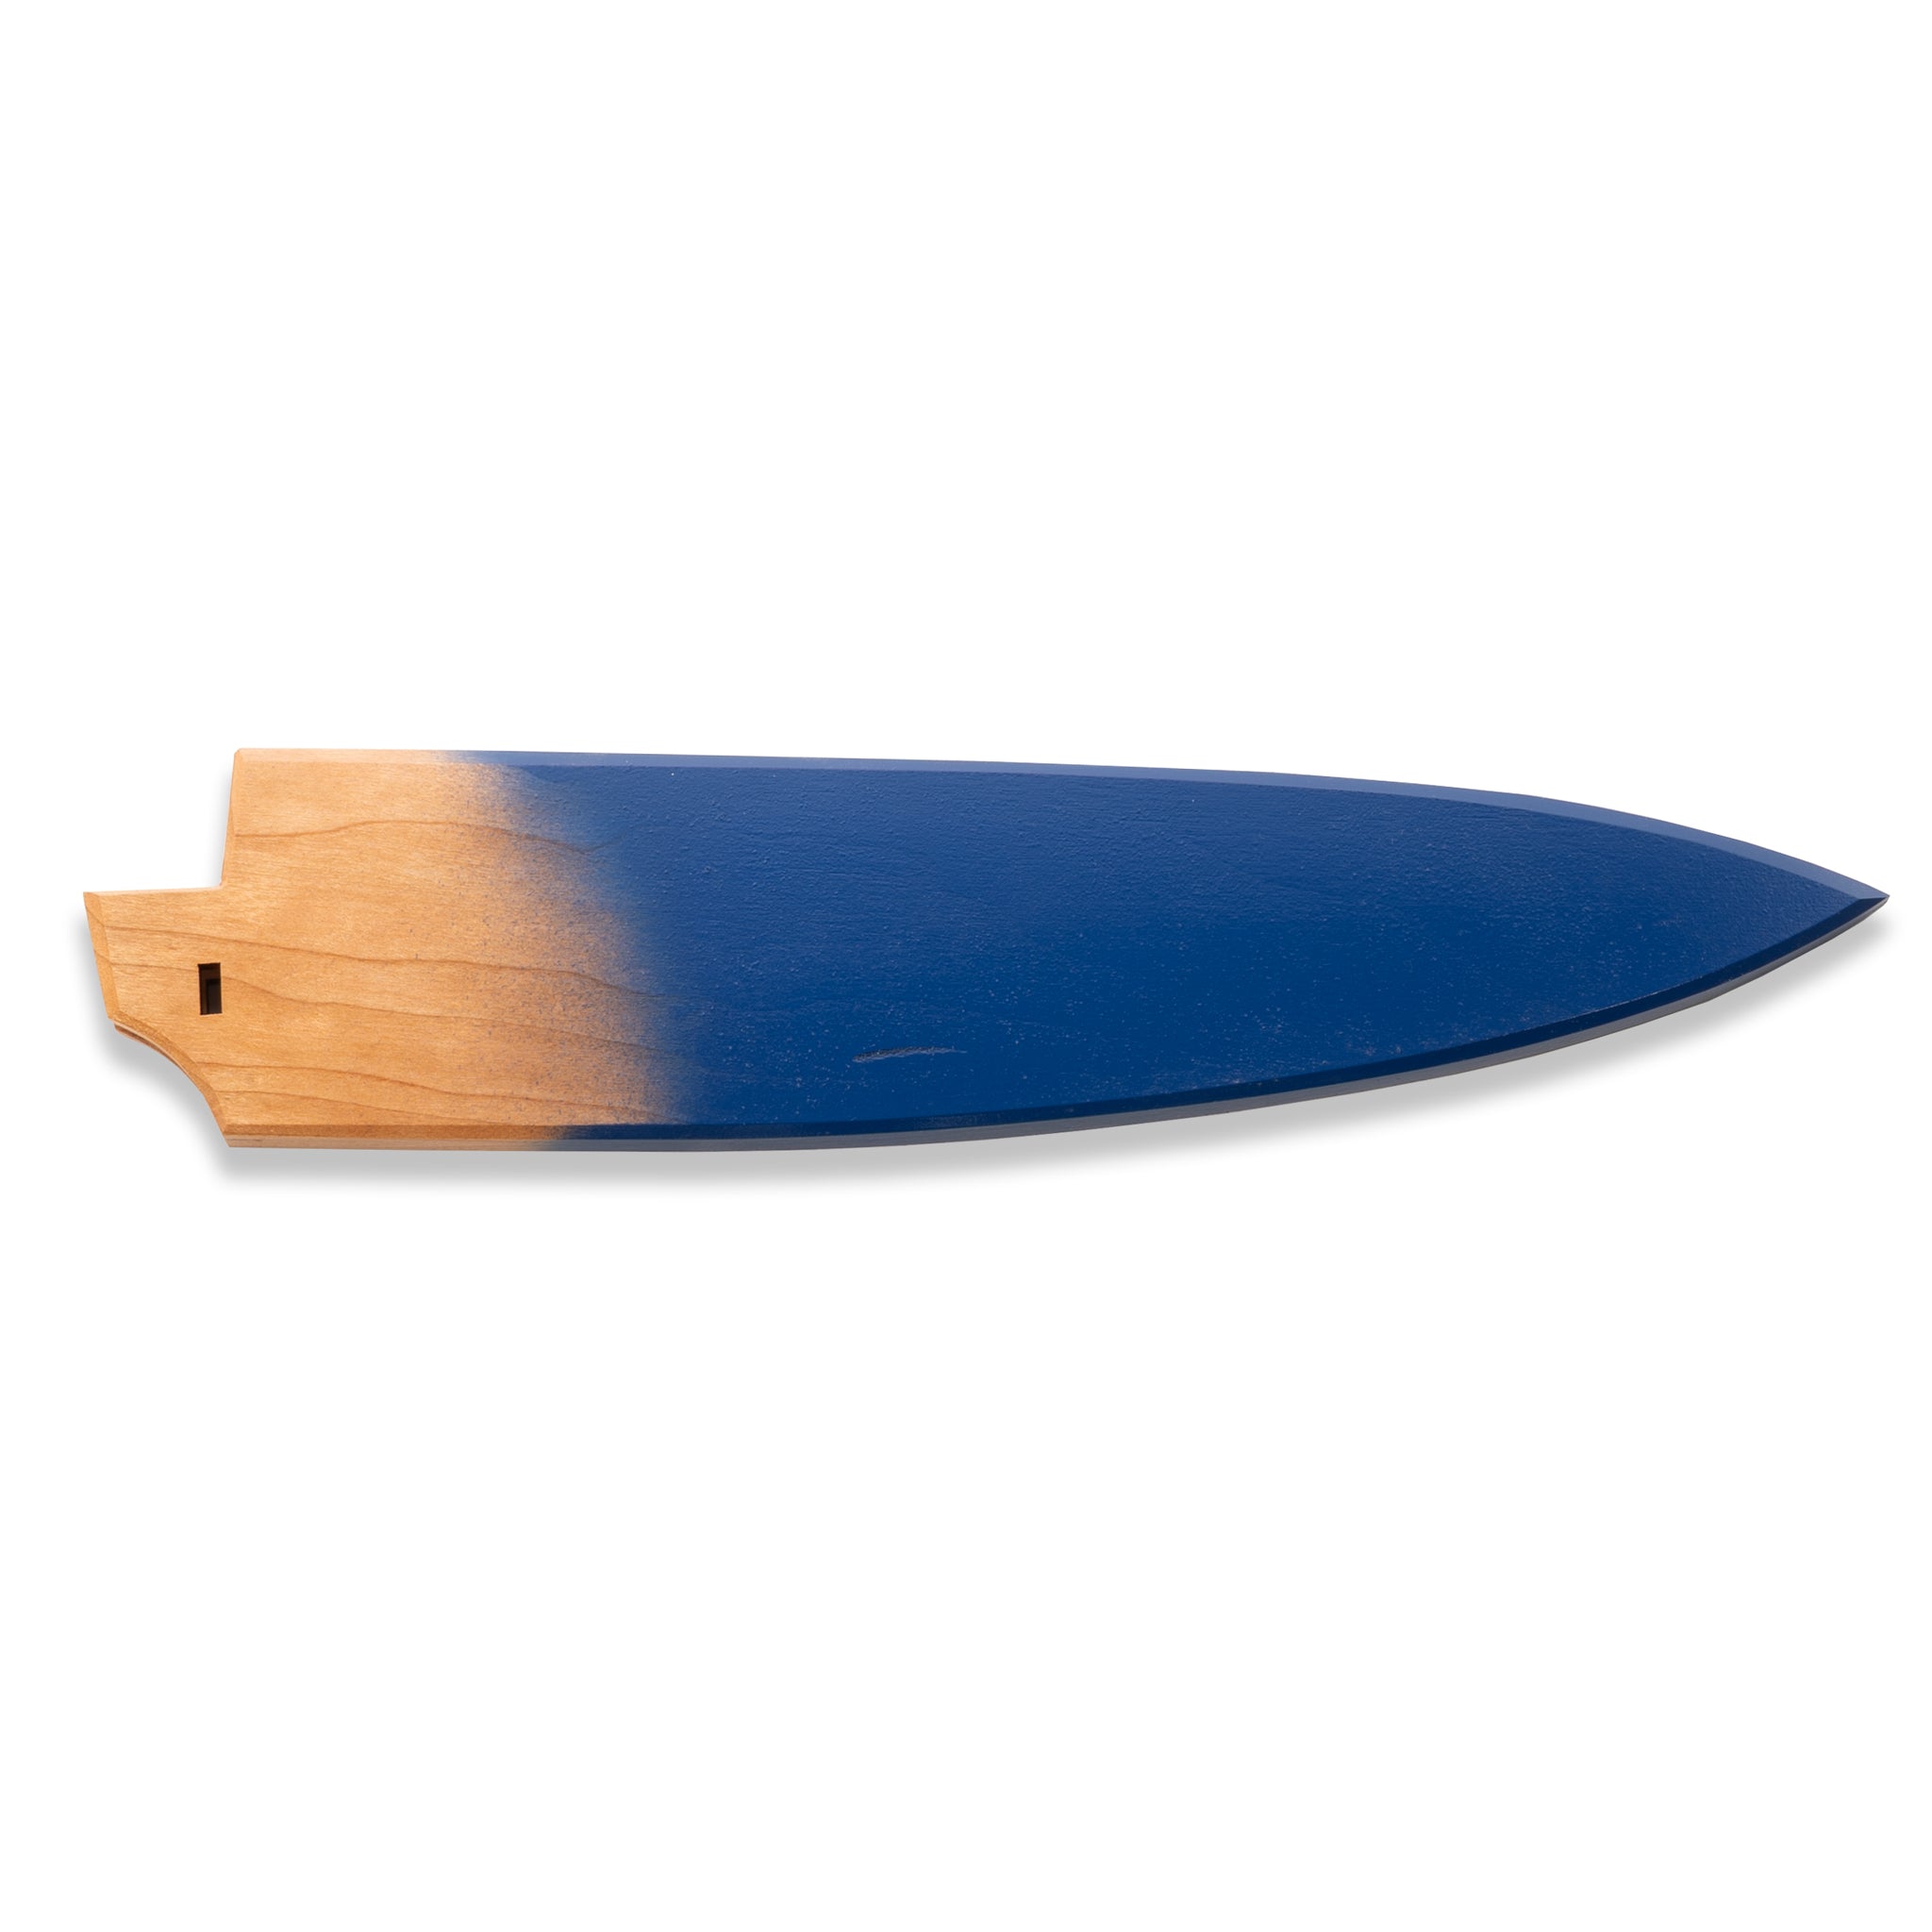 Cherry wood and blue saya knife cover for Town Cutler Tahoe Bliss 10" Chef Knife.